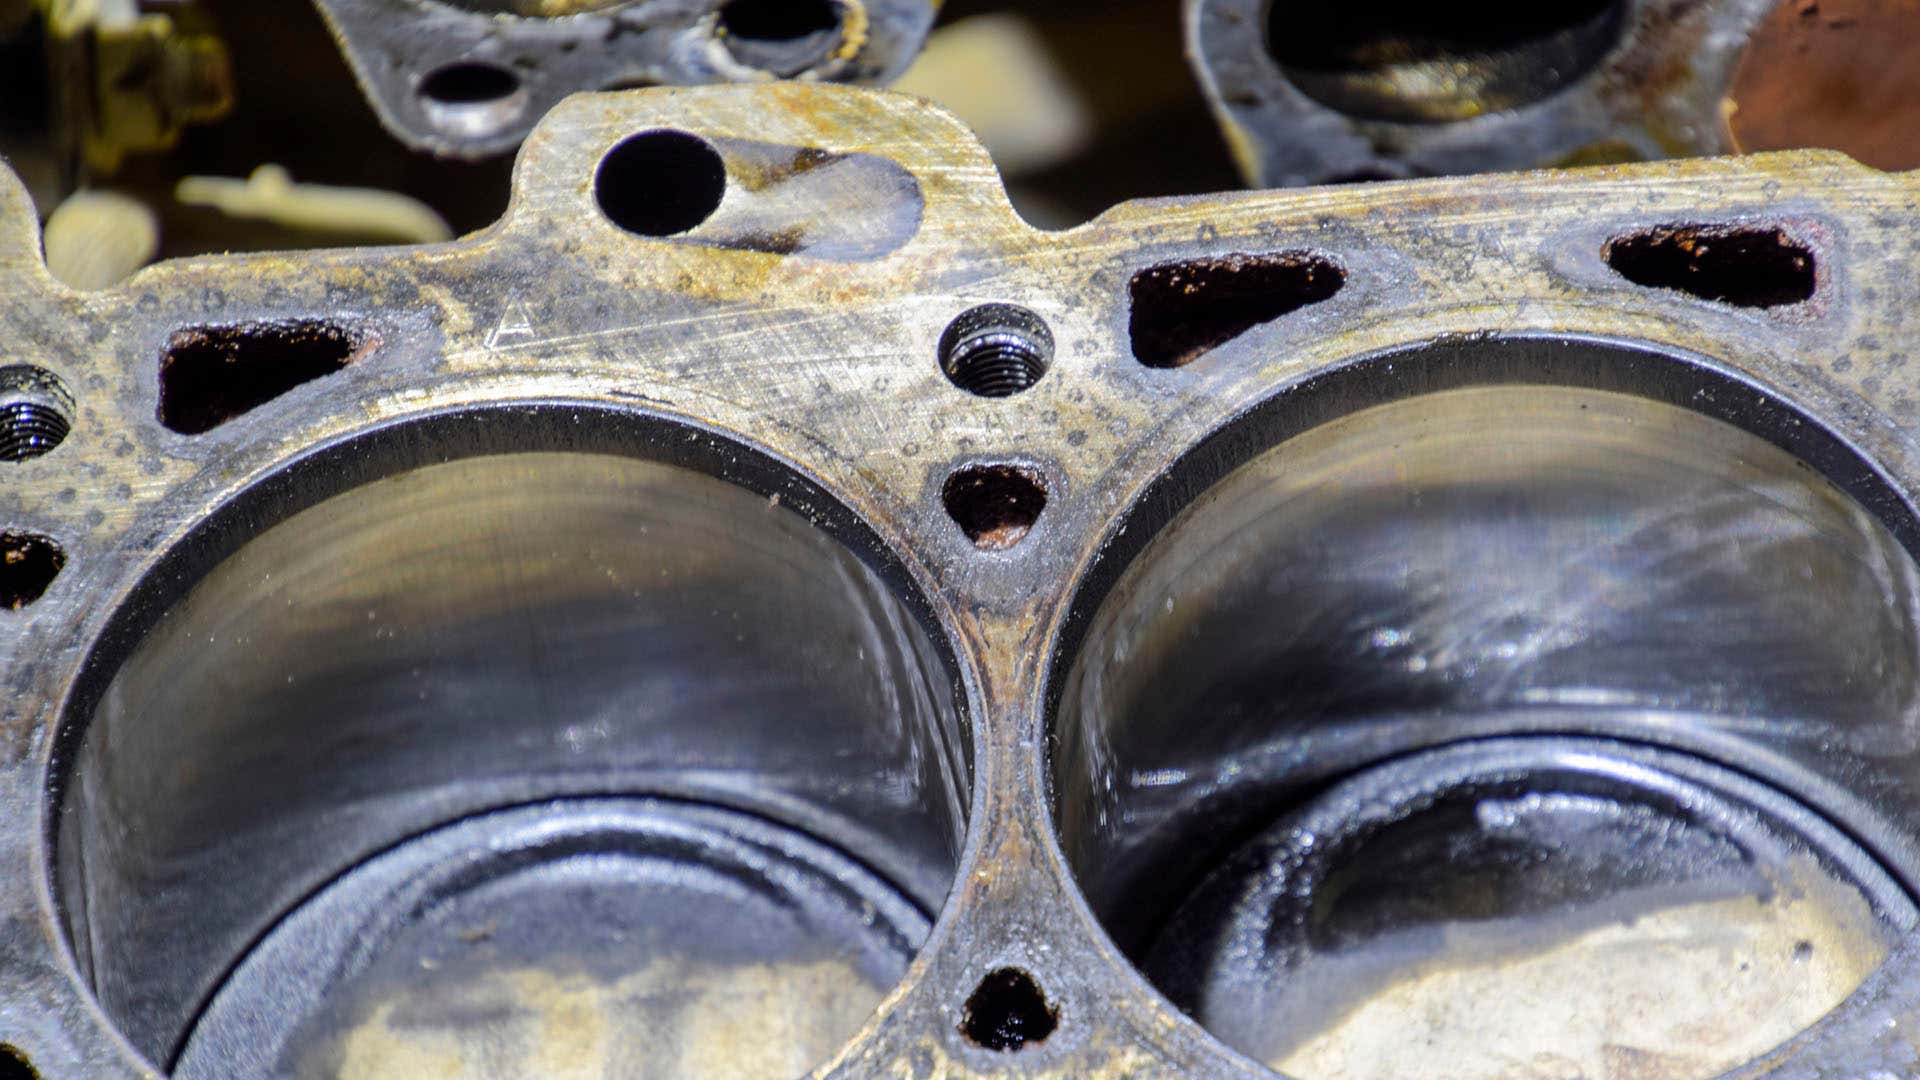 Head Gasket Repair: How To Fix It? | The Drive